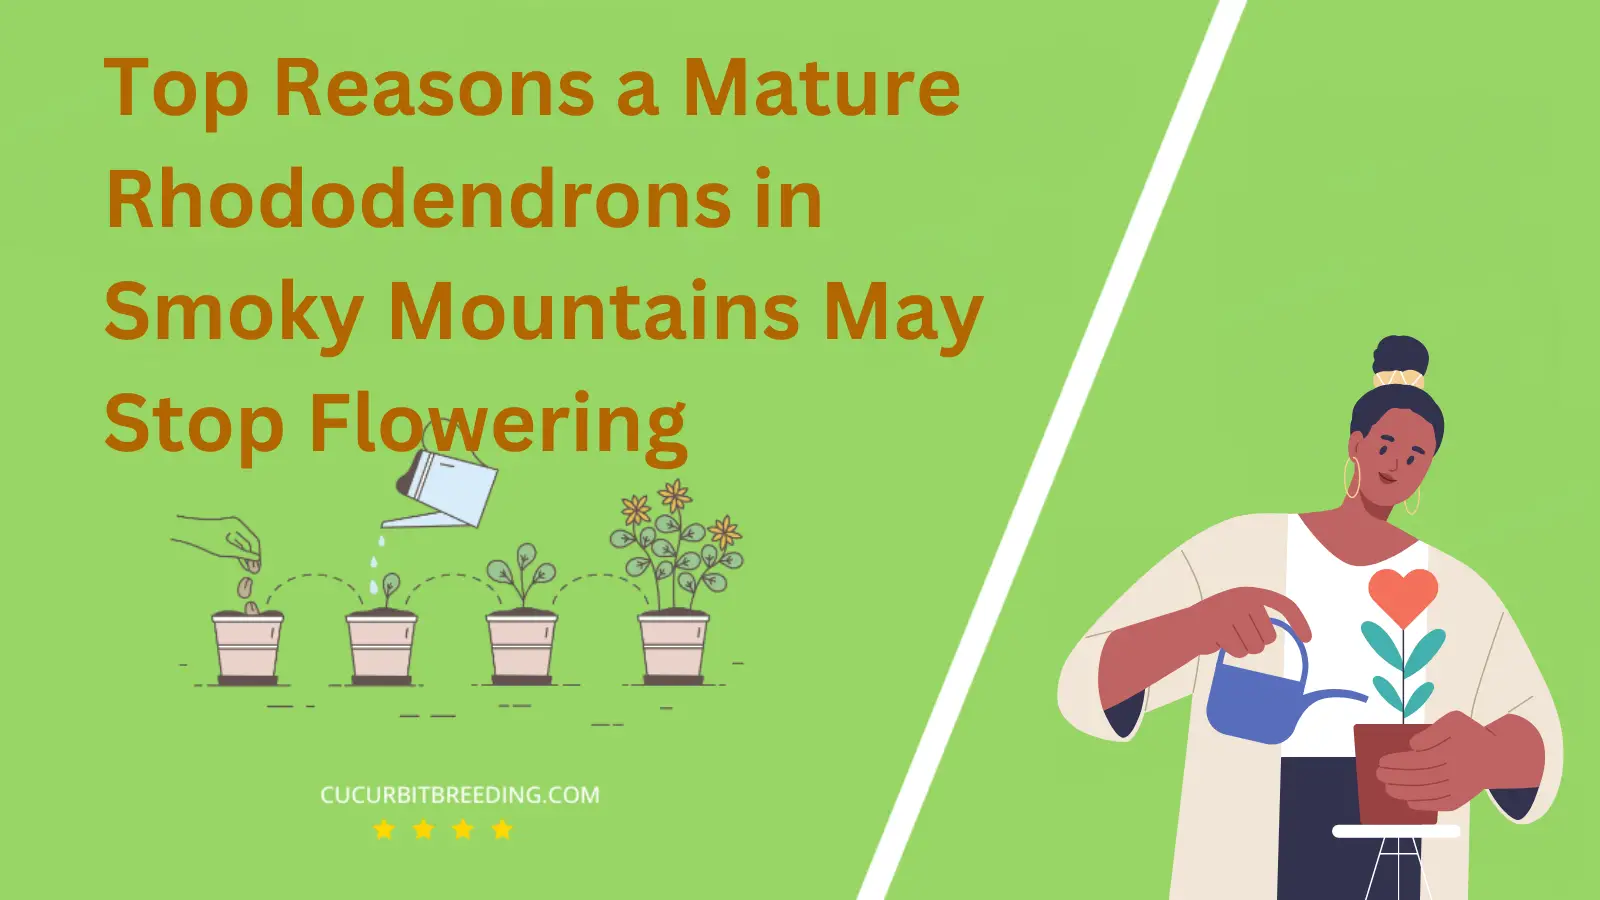 Top Reasons a Mature Rhododendrons in Smoky Mountains May Stop Flowering